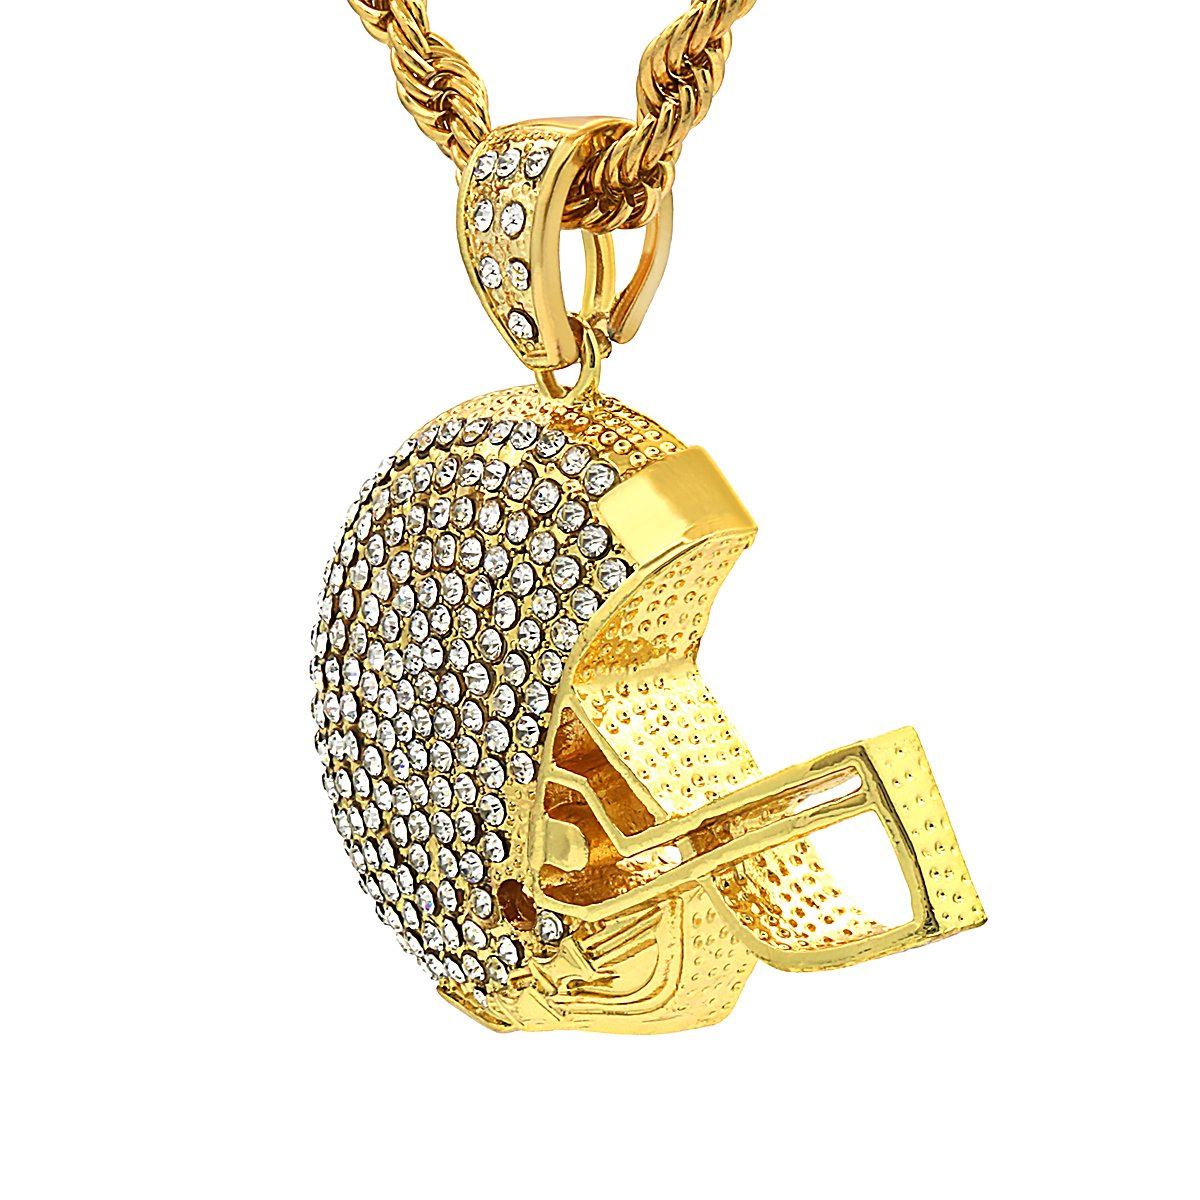 14k Gold Filled NFL Helmet Pendant with Rope Chain